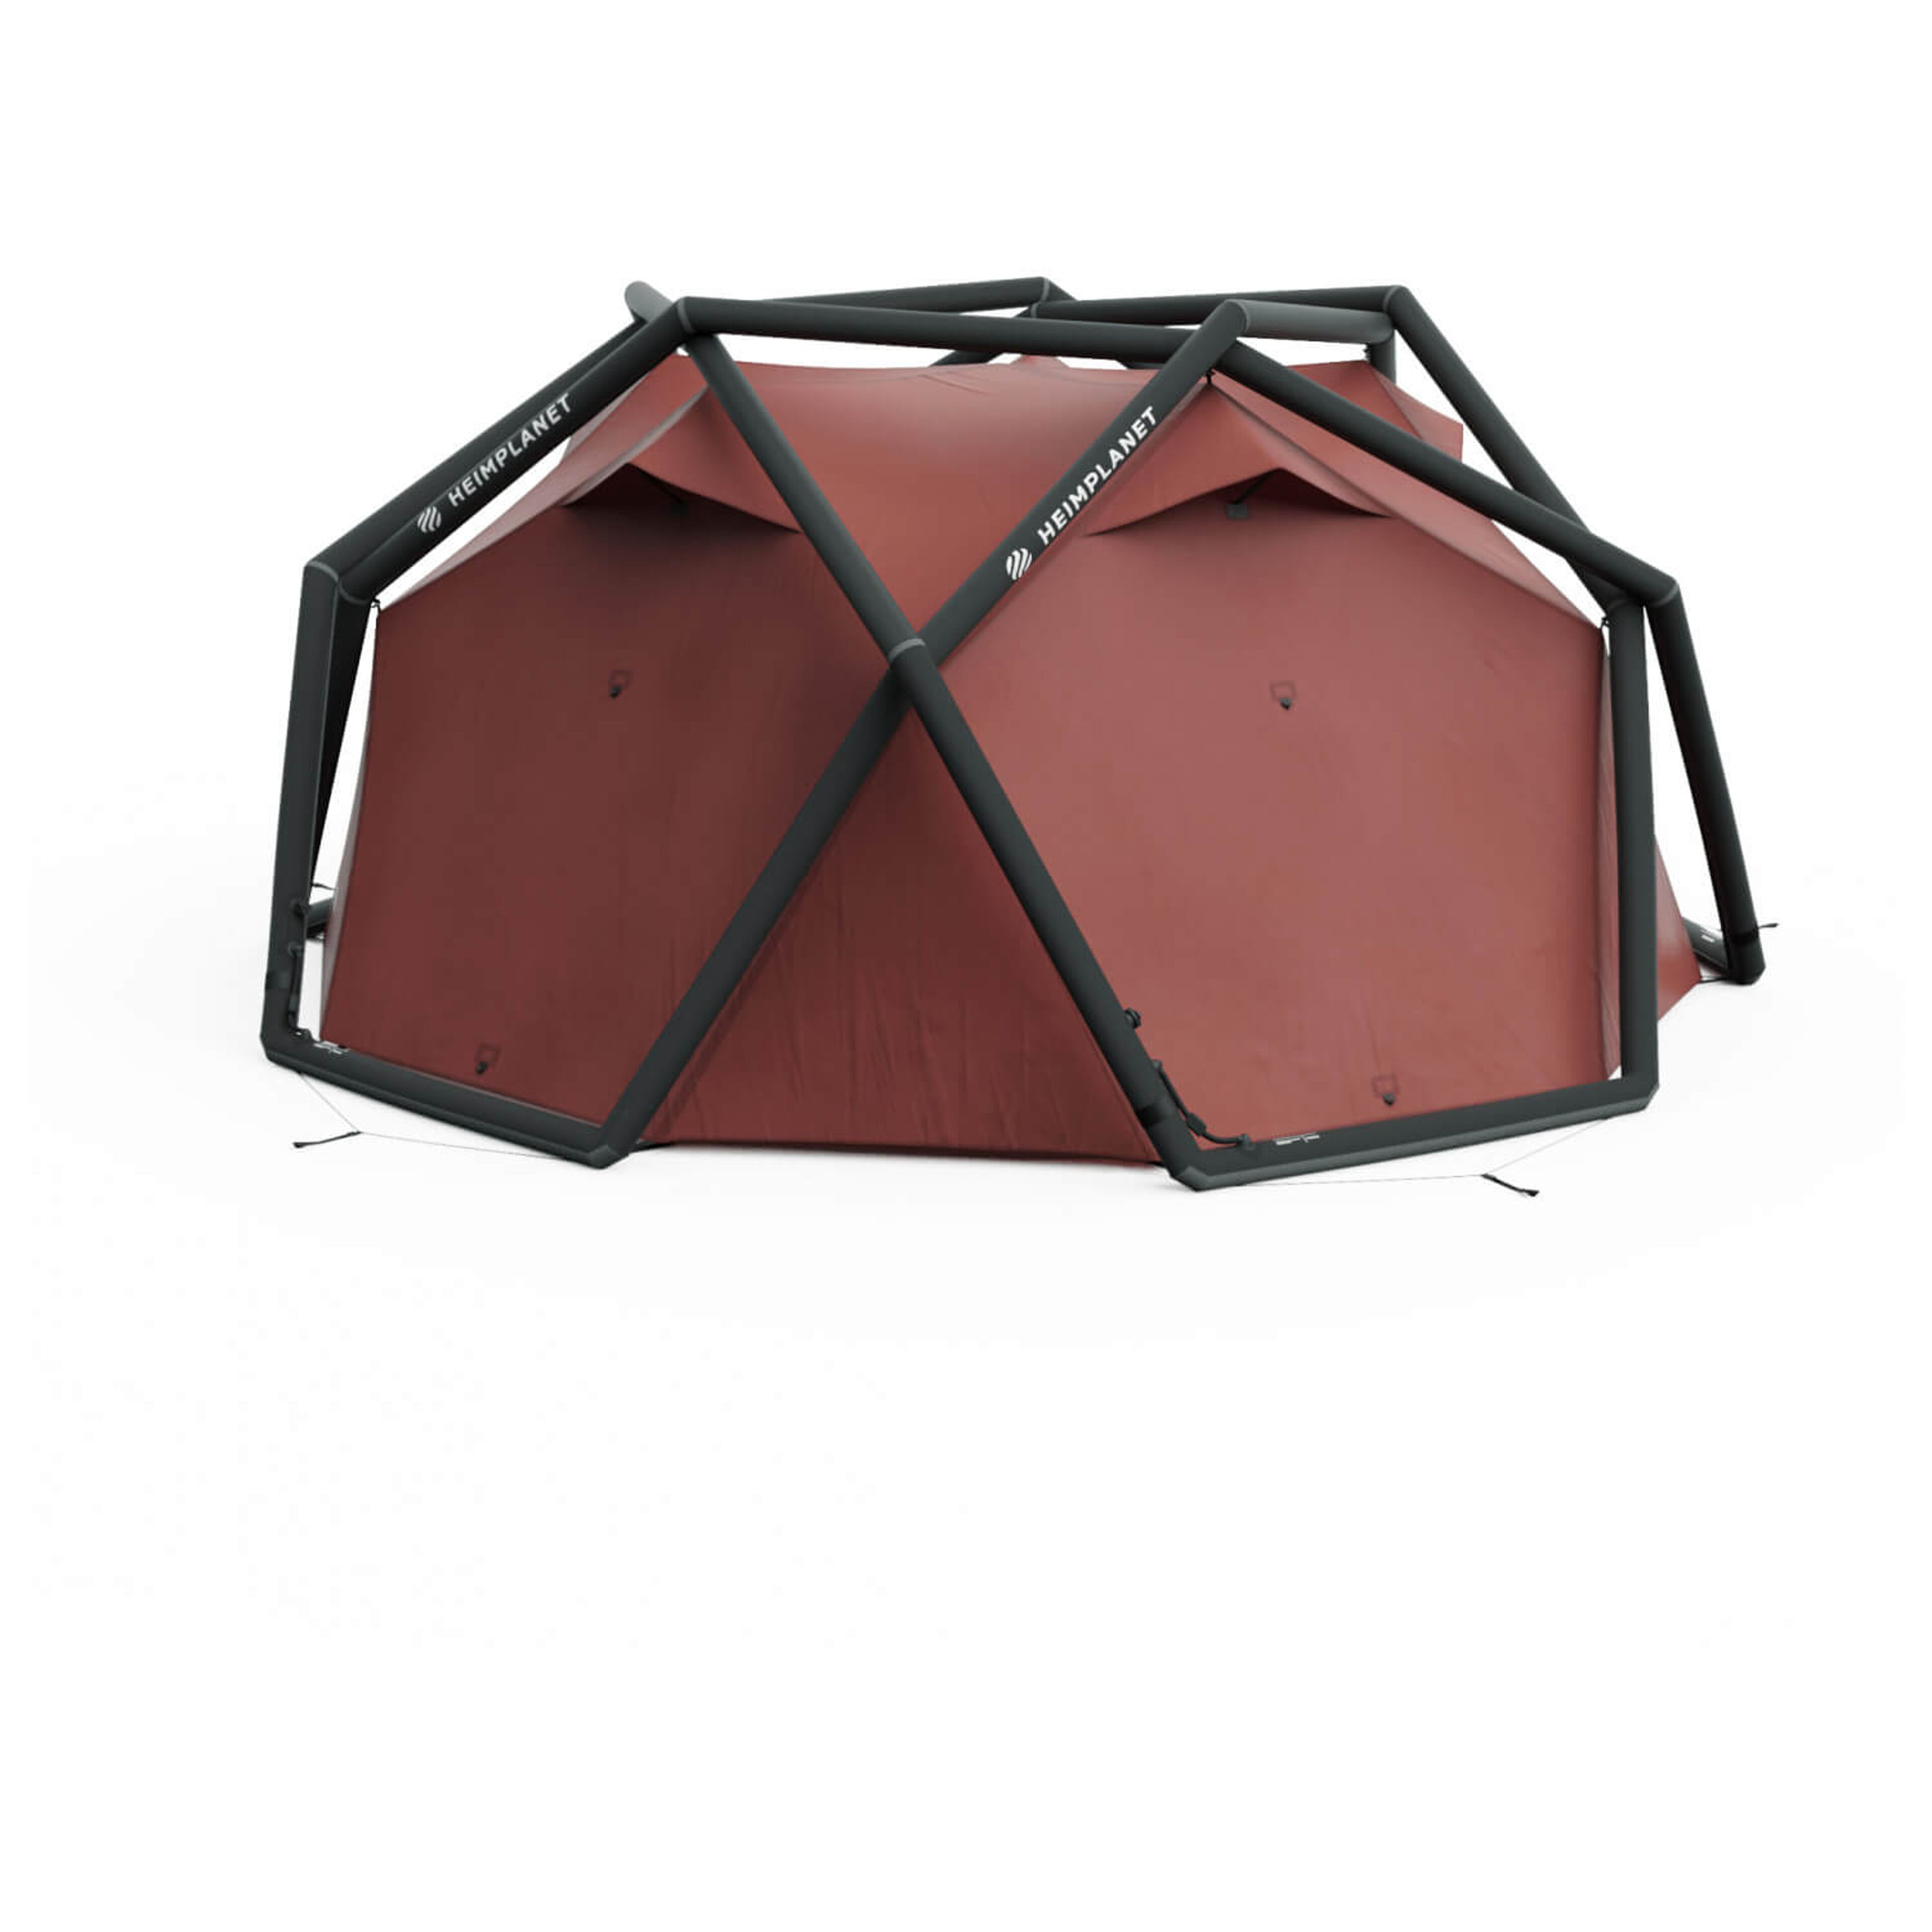 Heimplanet The Cave XL 4 stagioni Tenda